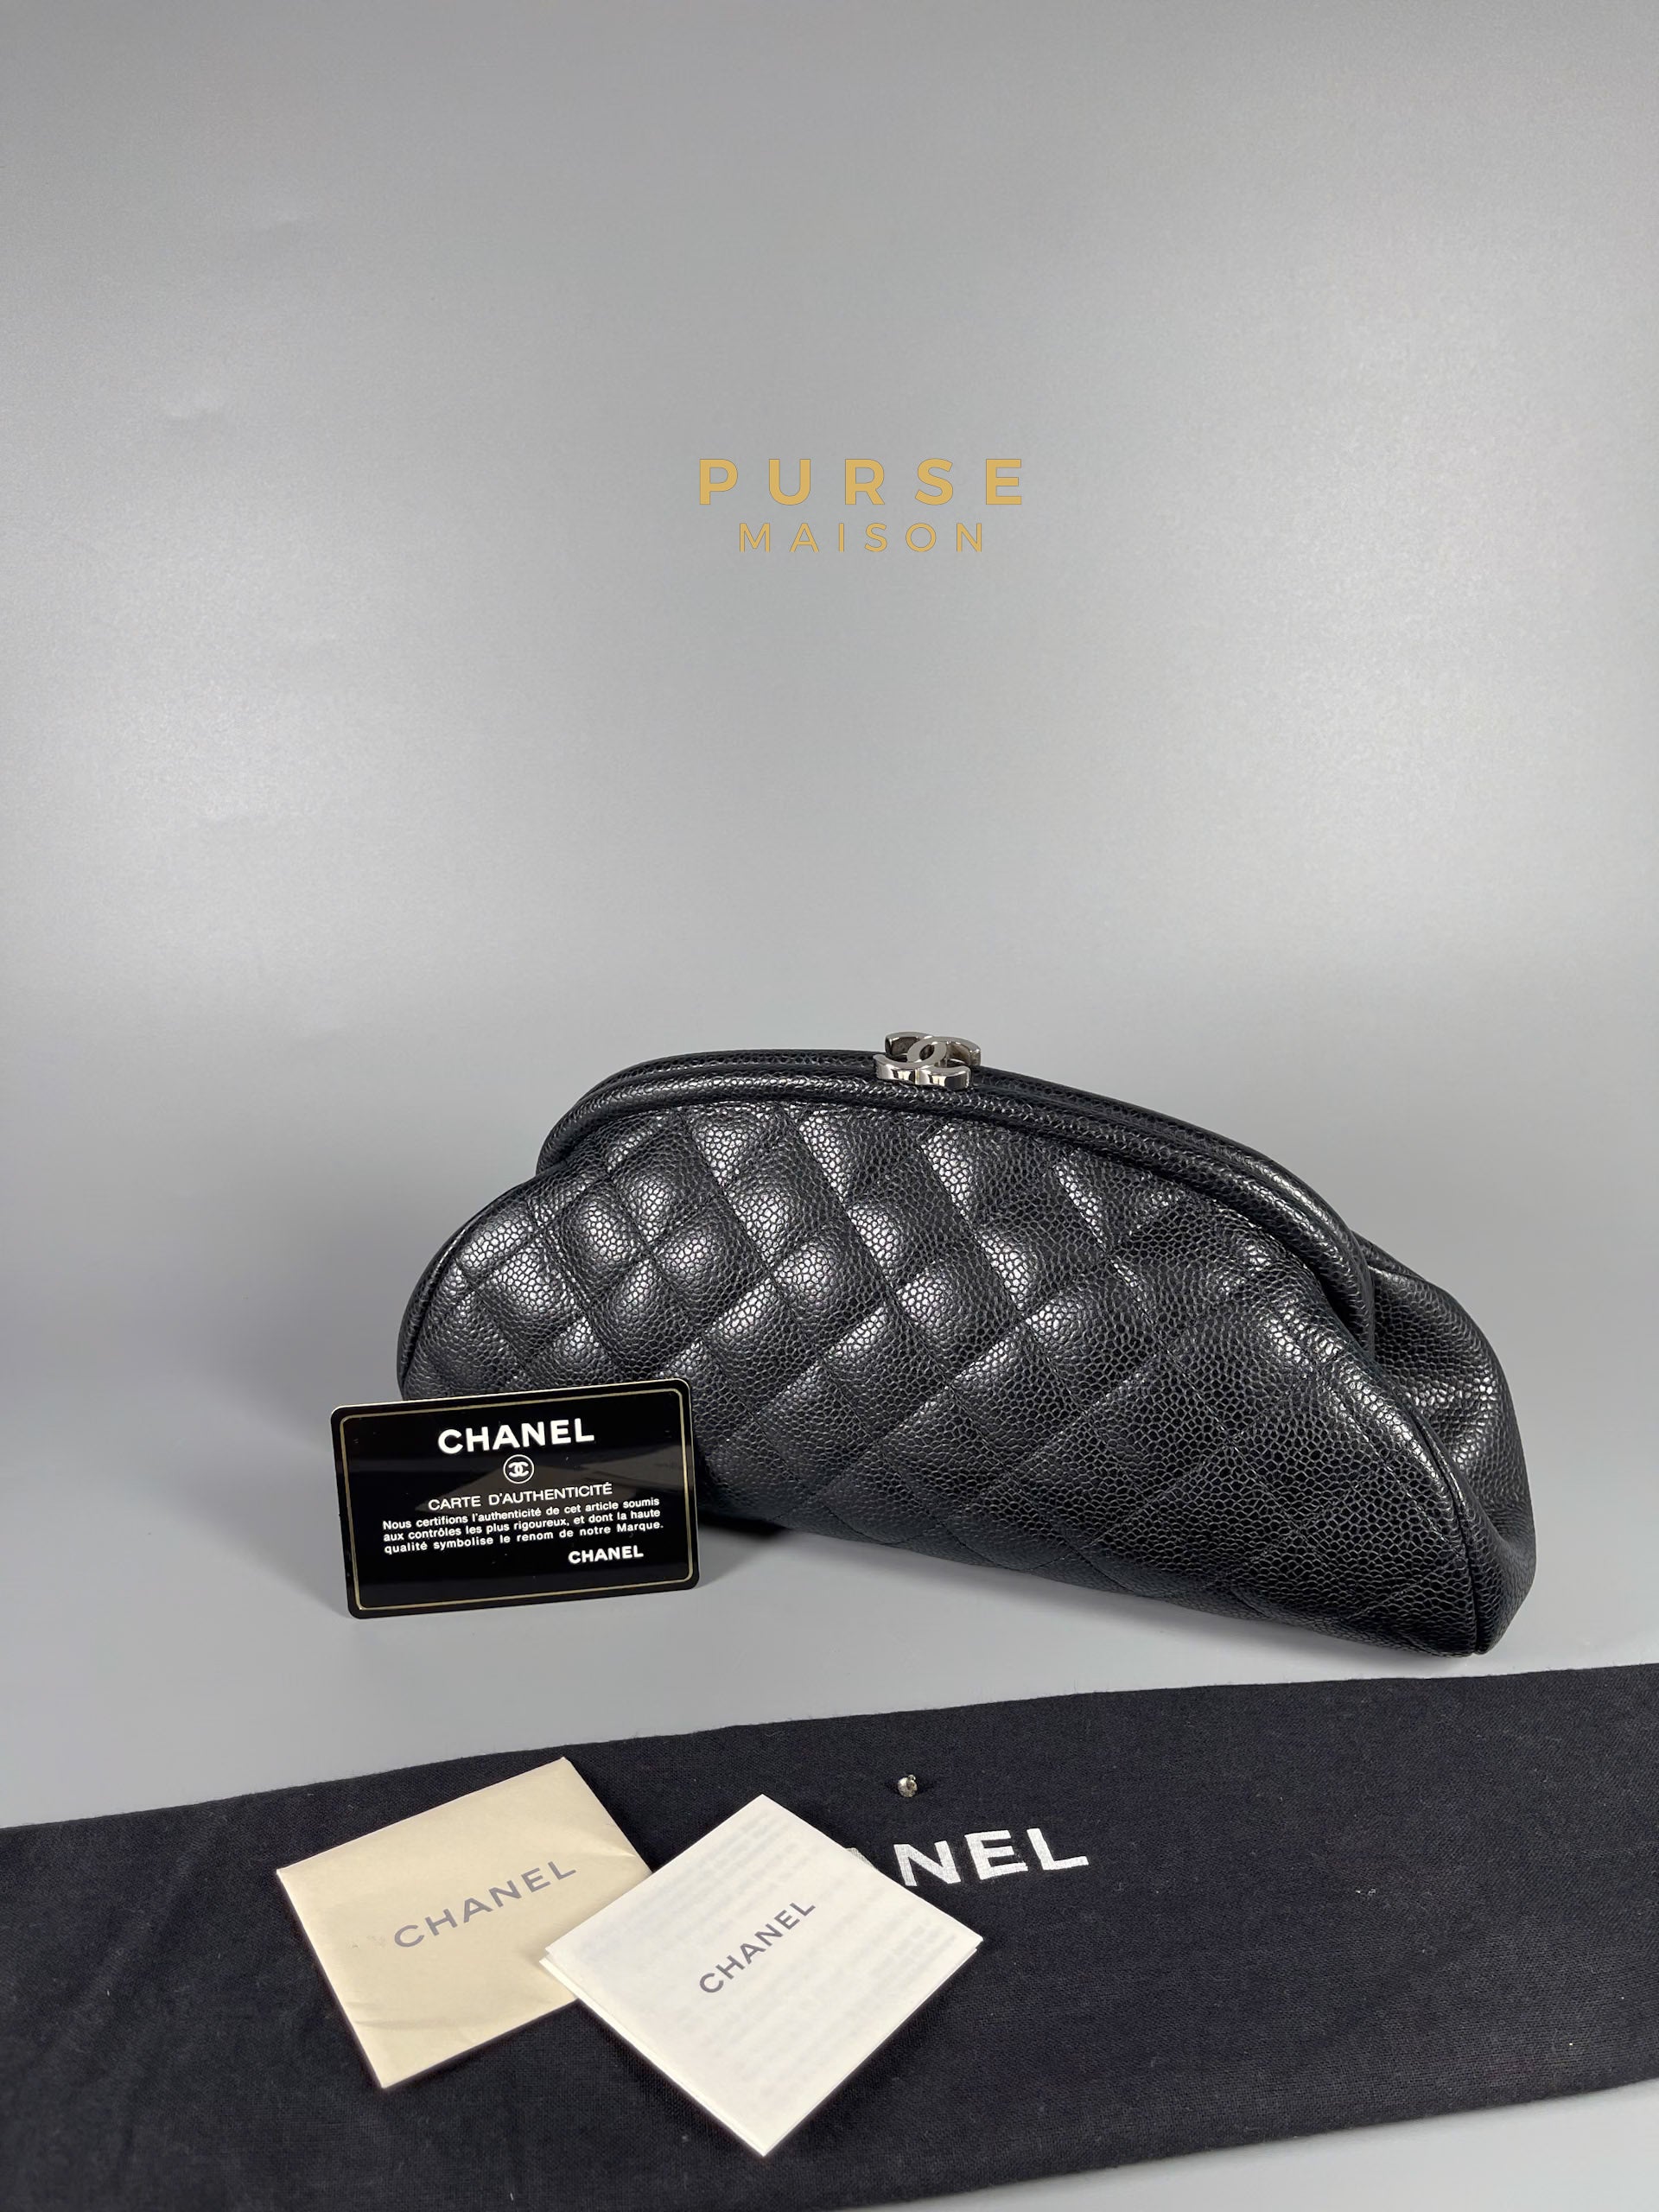 Chanel CC Clutch in Black Quilted Caviar Series 13 | Purse Maison Luxury Bags Shop